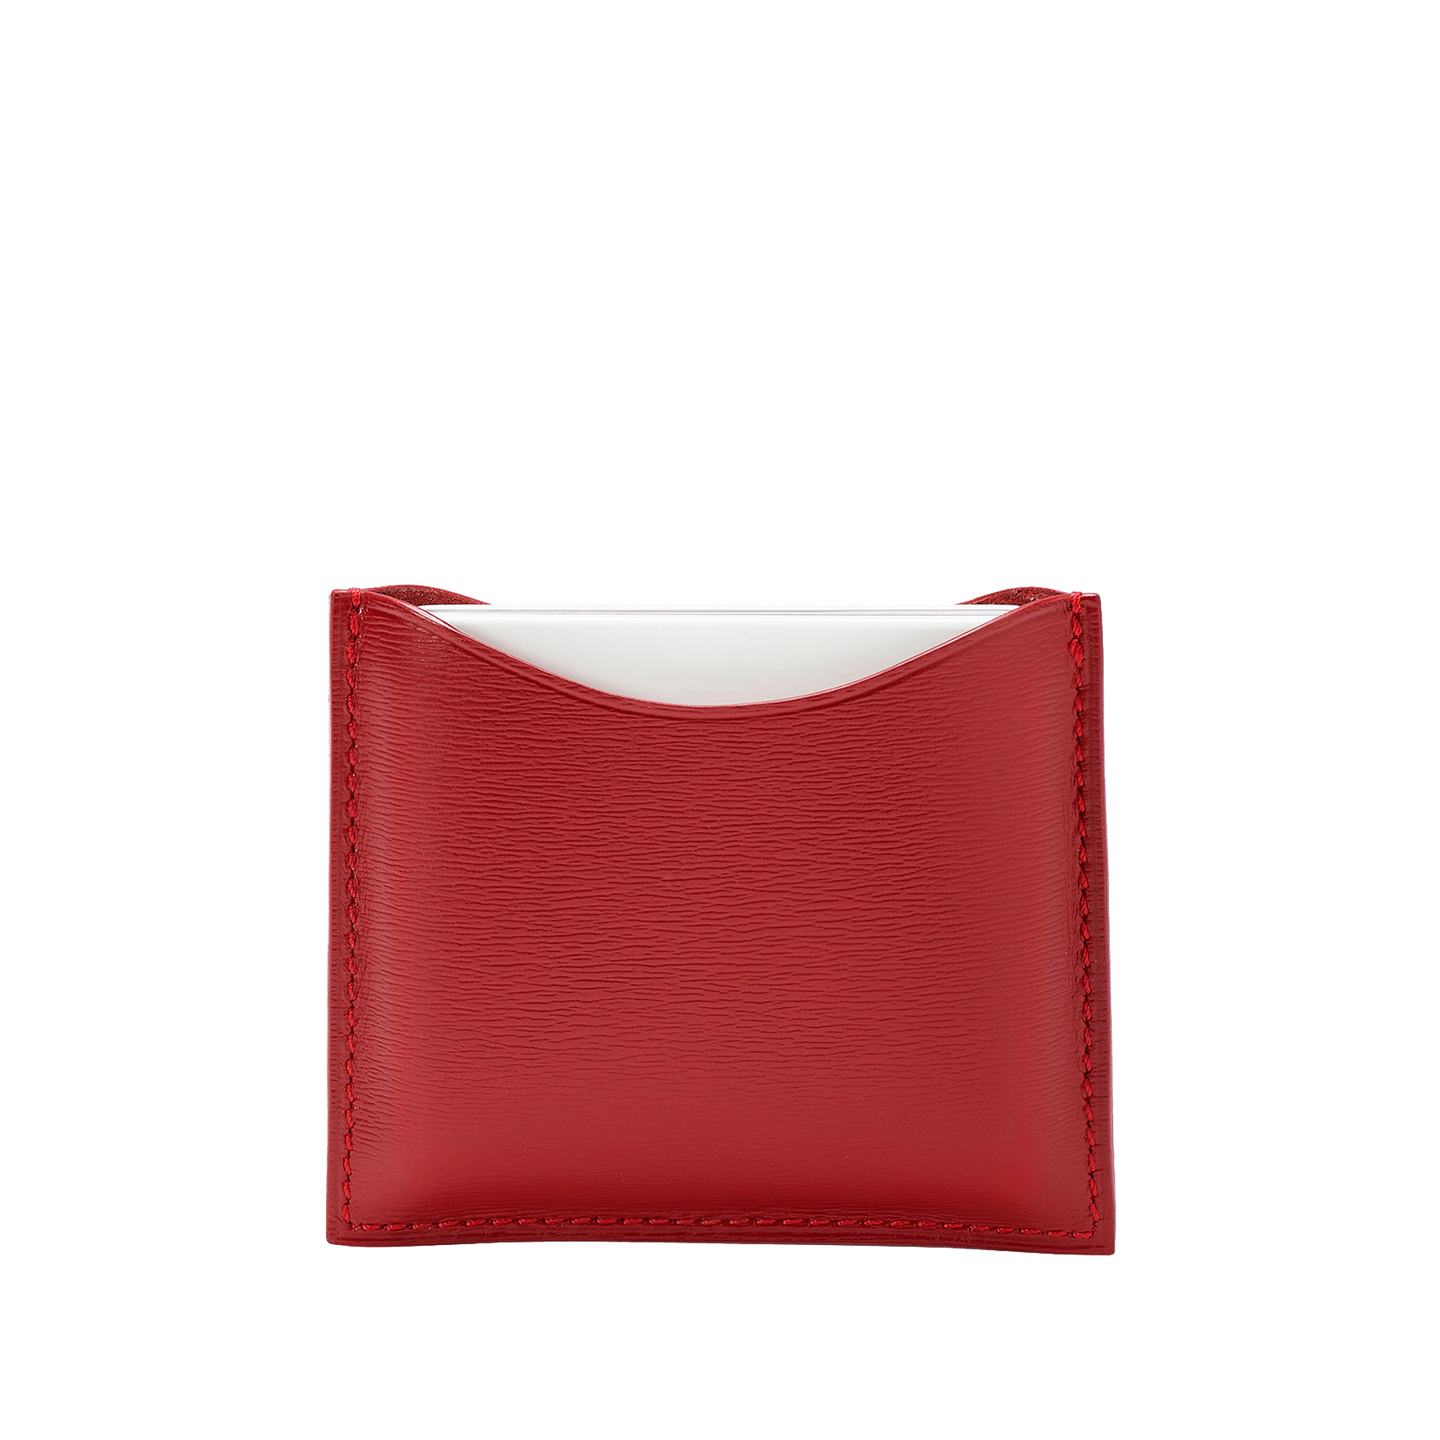 Refillable Red fine leather powder case